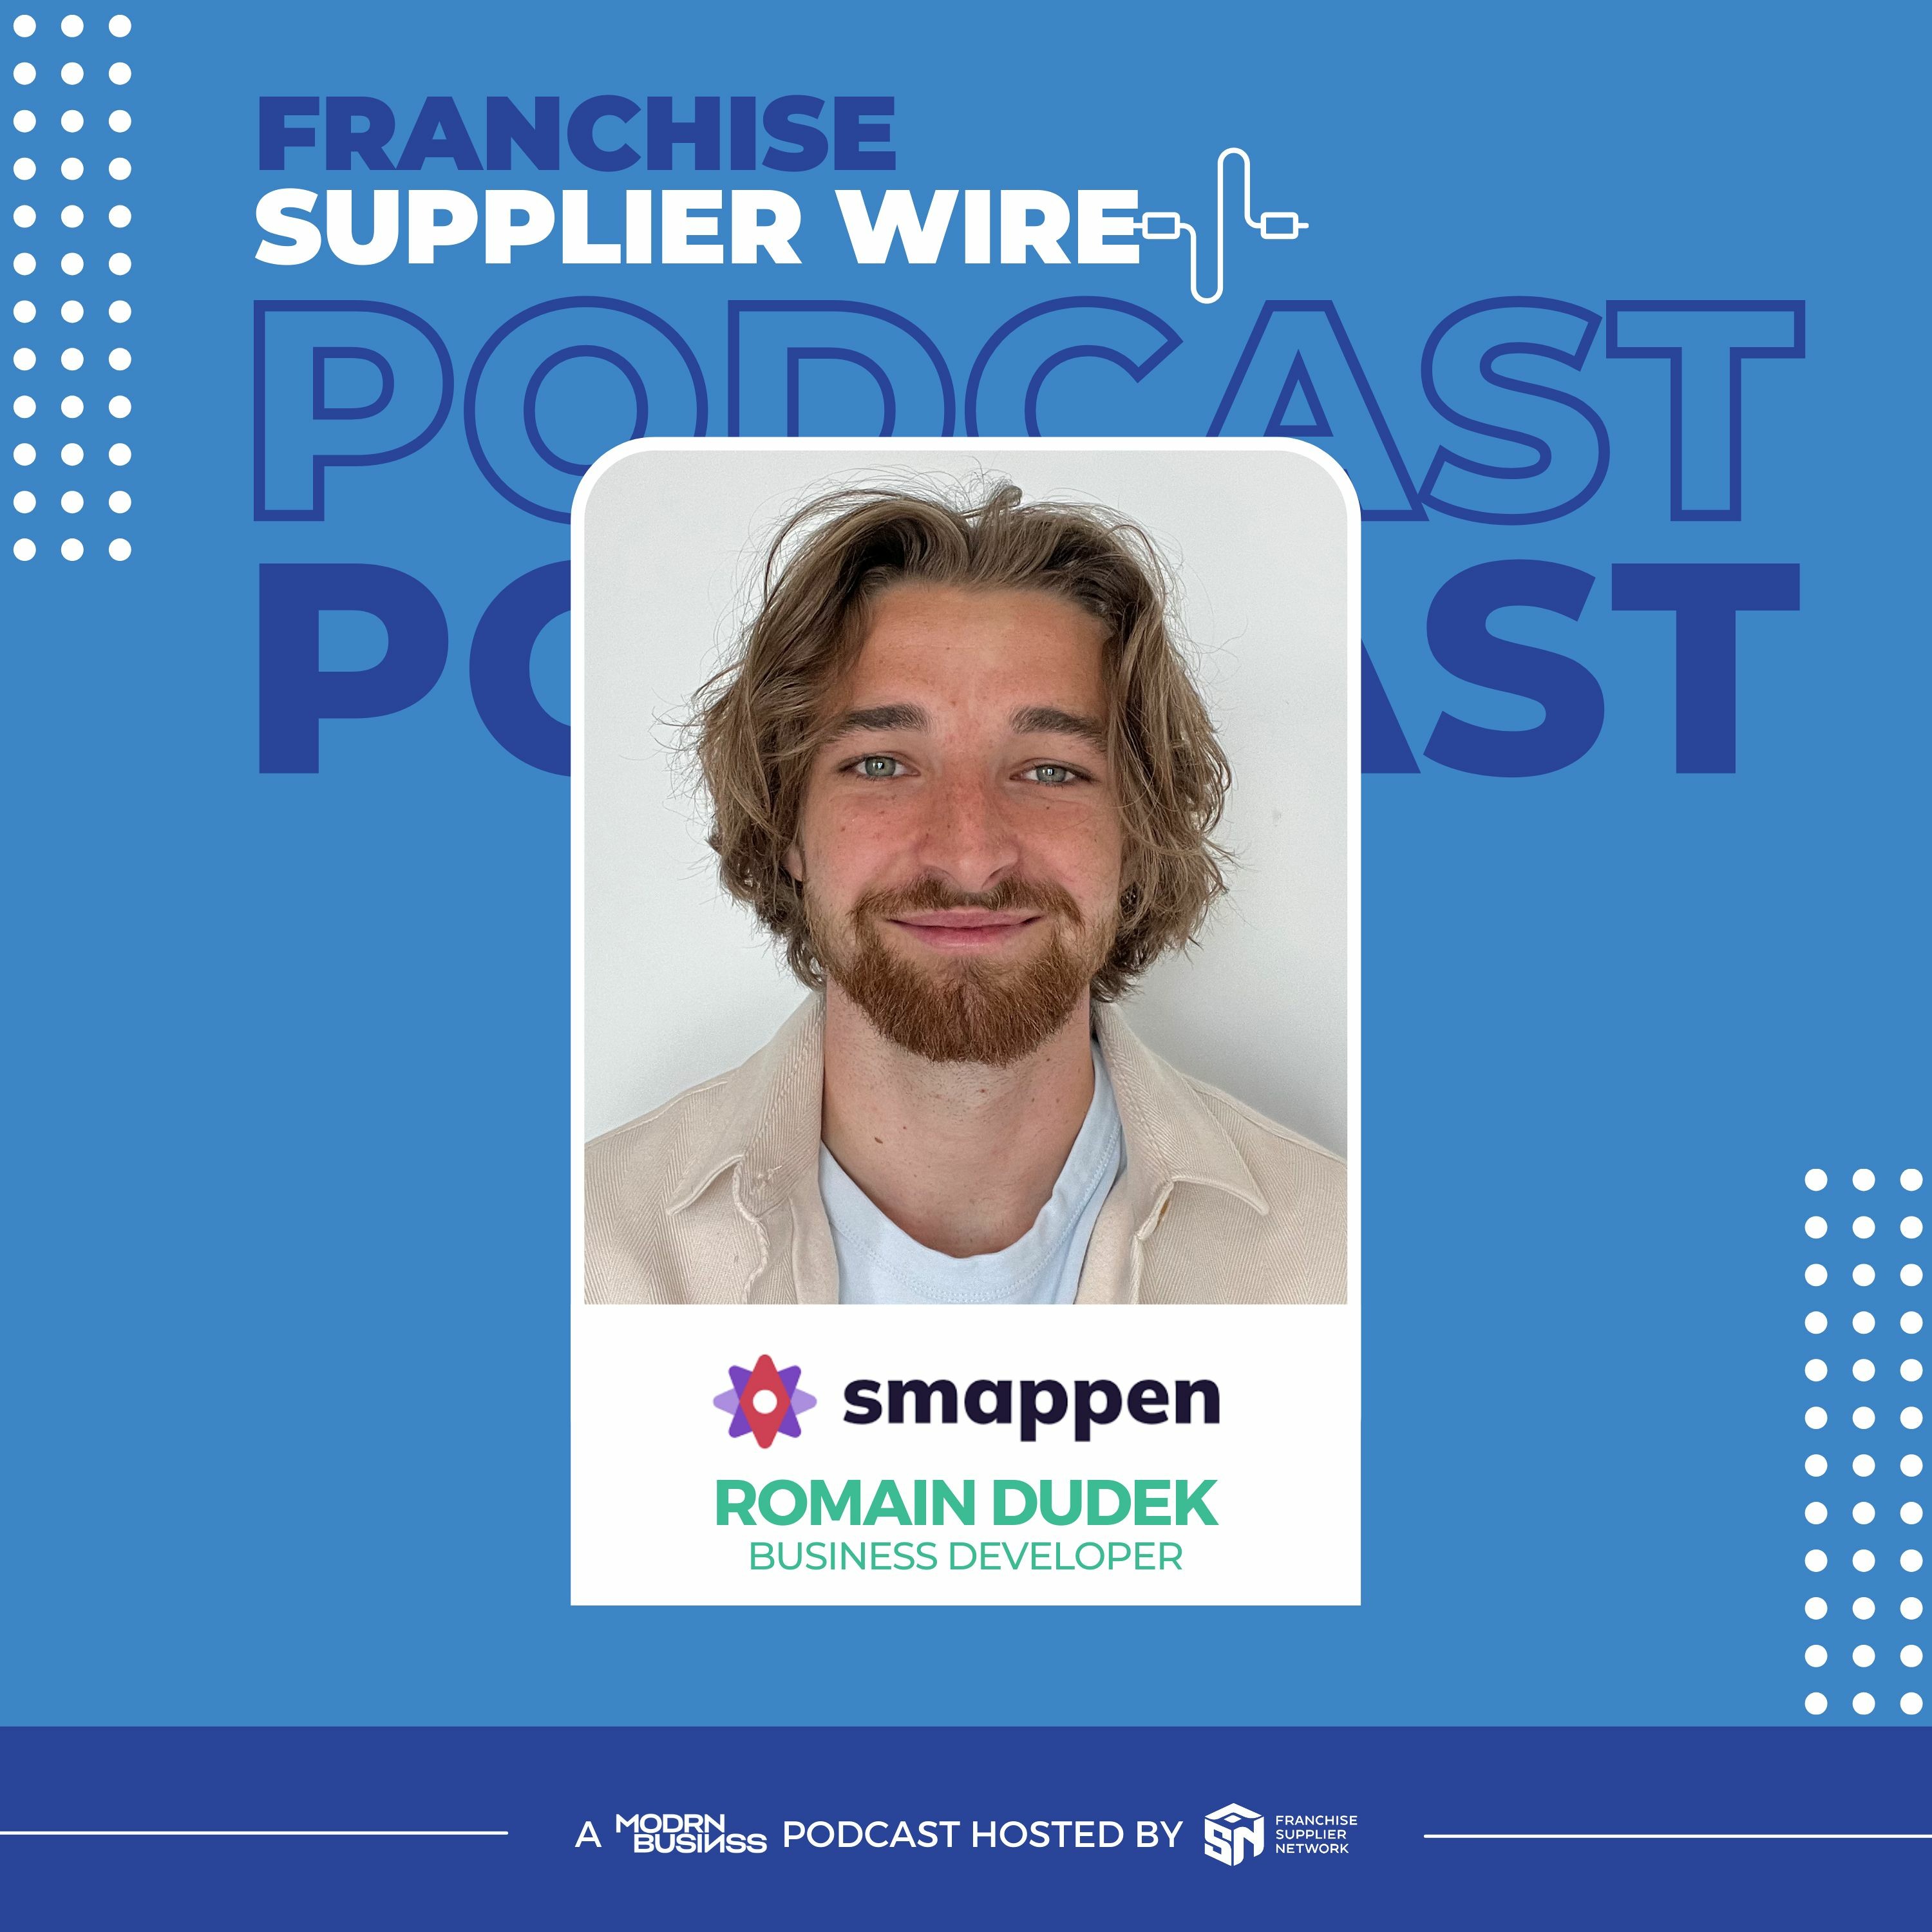 Supplier Wire 032: How to Plan Your Franchise Development with Romain Dudek of Smappen